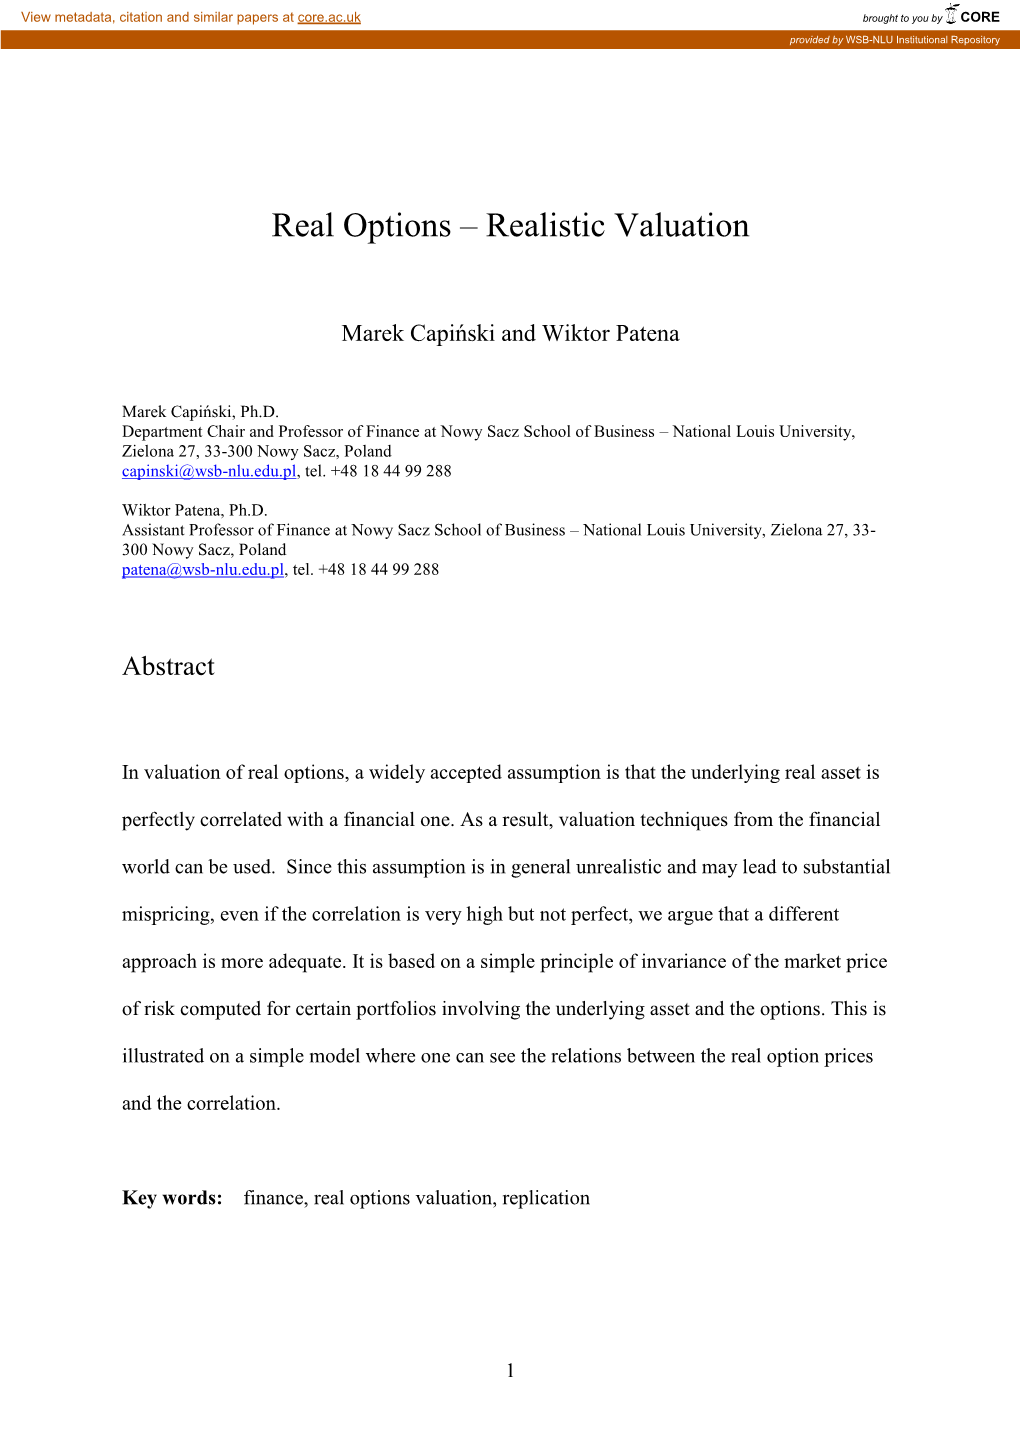 Real Options – Realistic Valuation